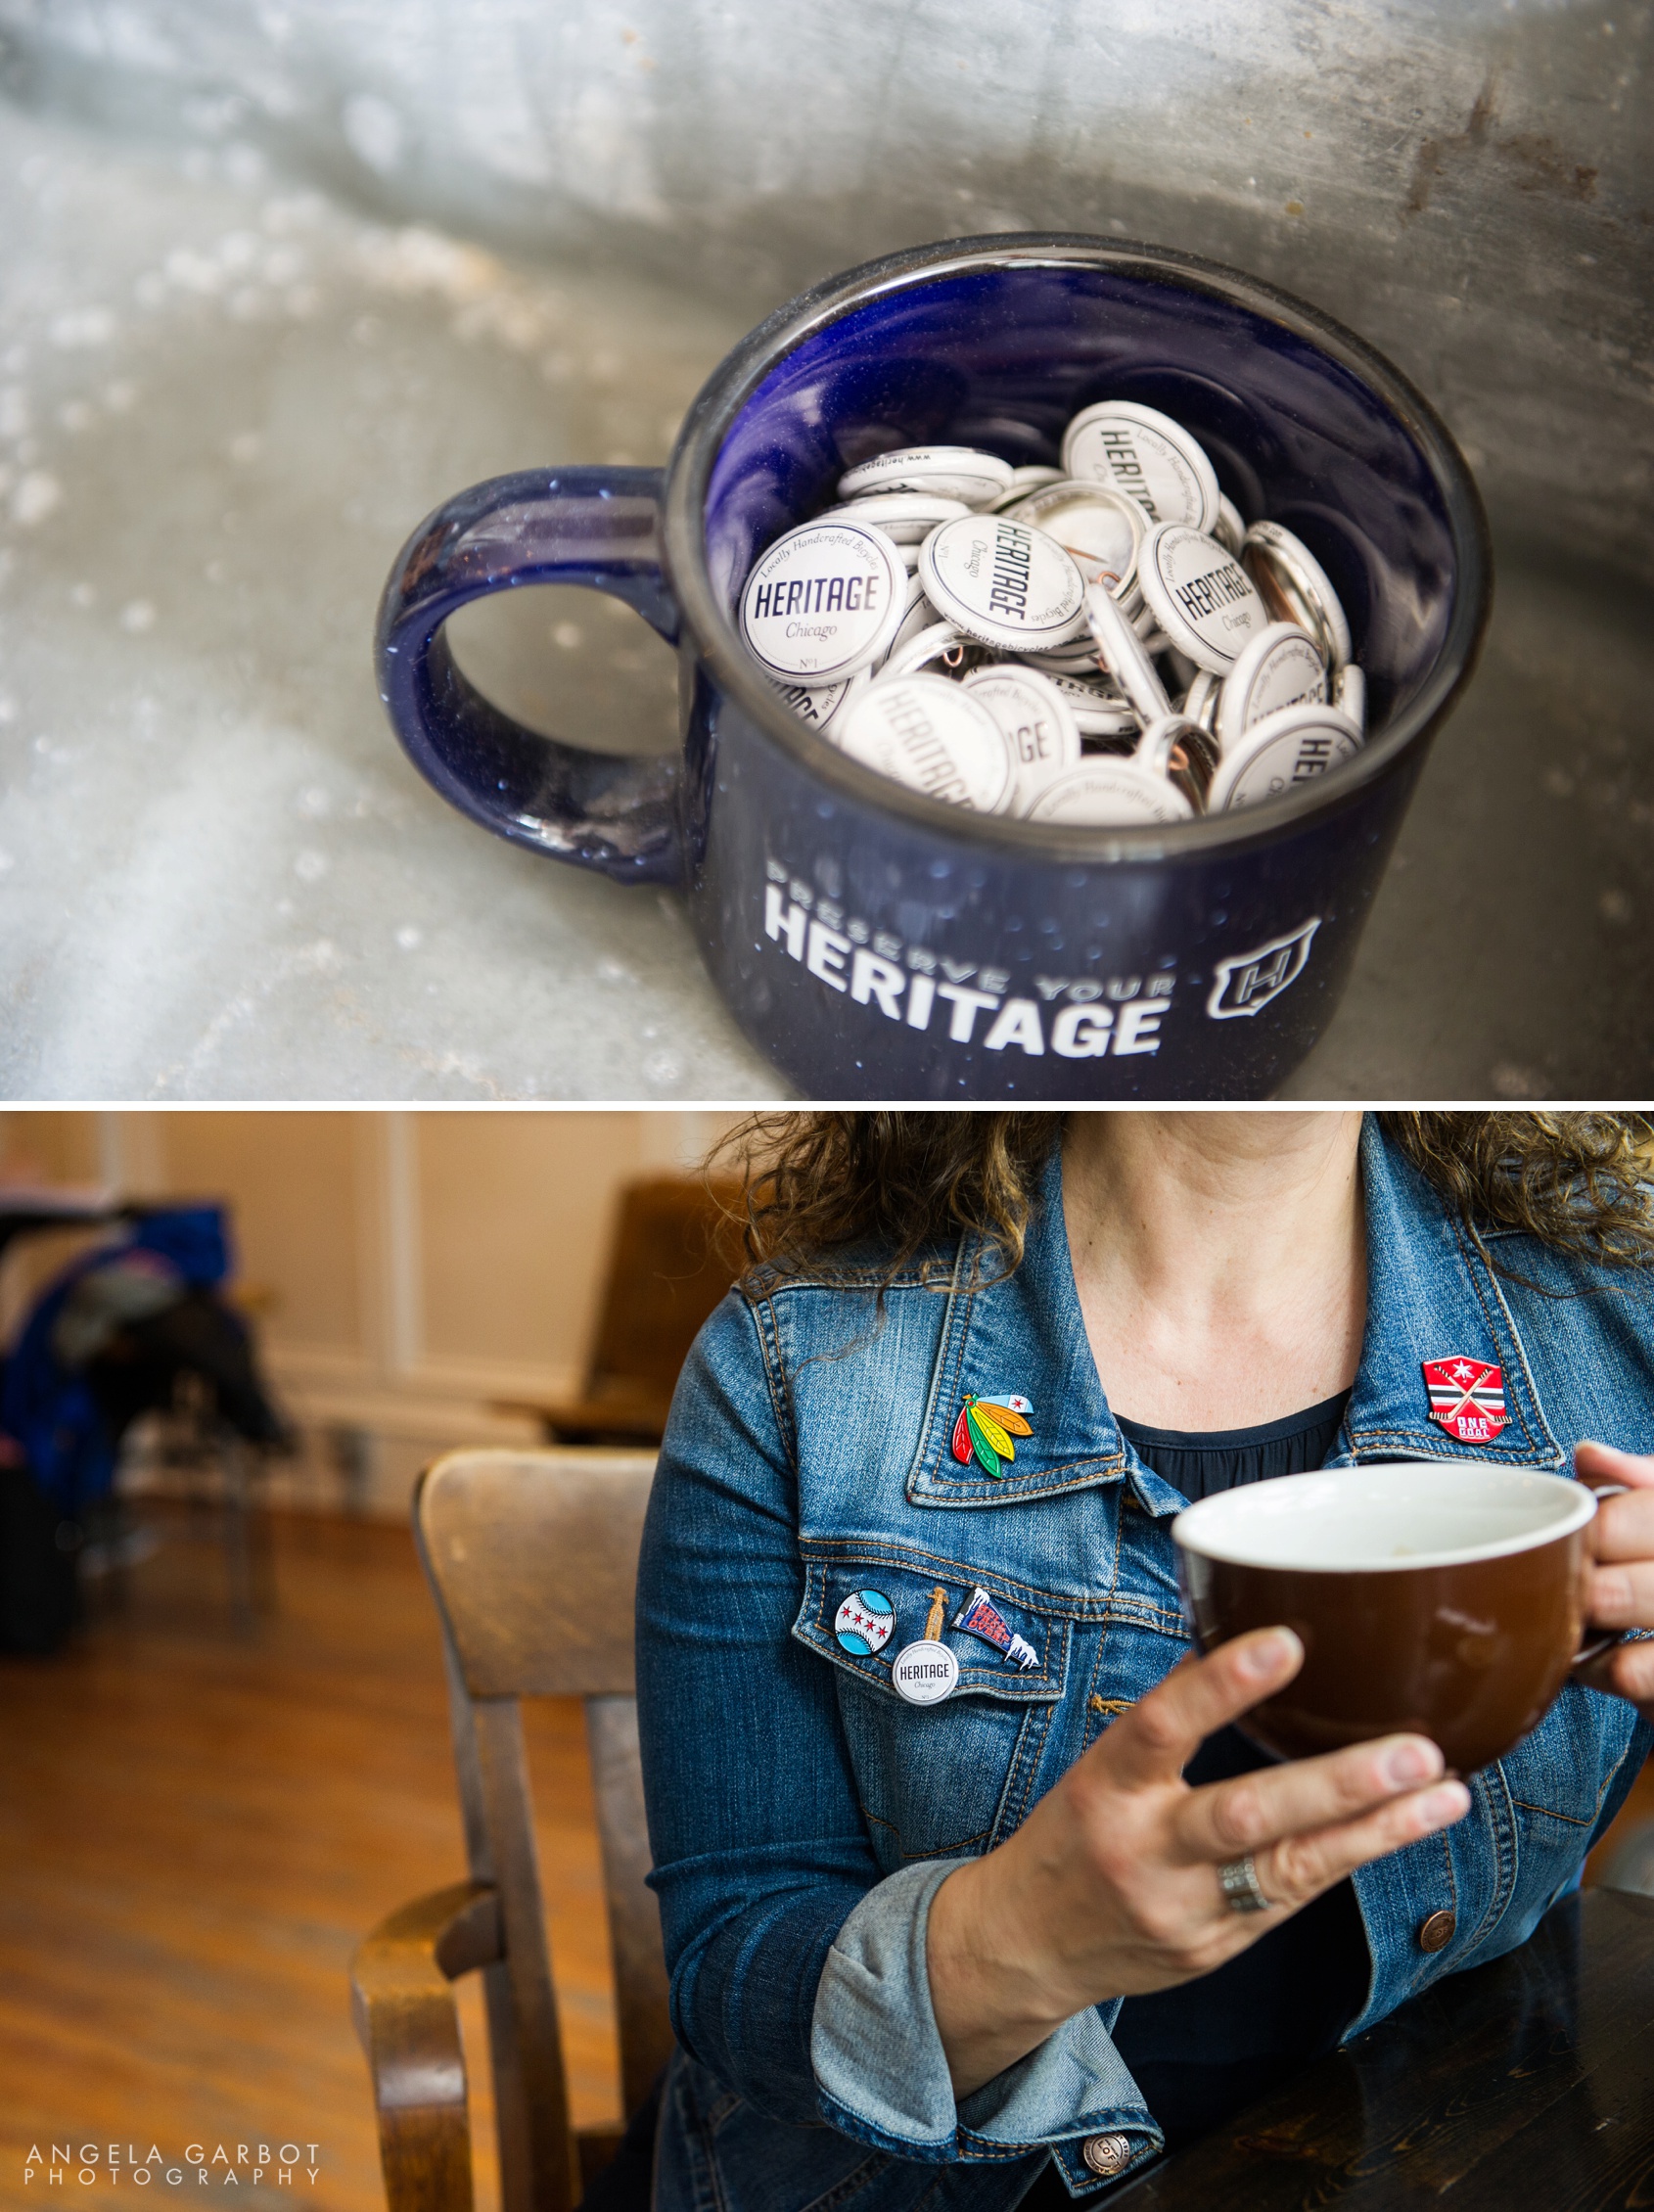 Branding photography of Big League Pins and Heritage Bicycles and Coffee Shop in the Lakeview neighborhood of Chicago by Angela Garbot Photography